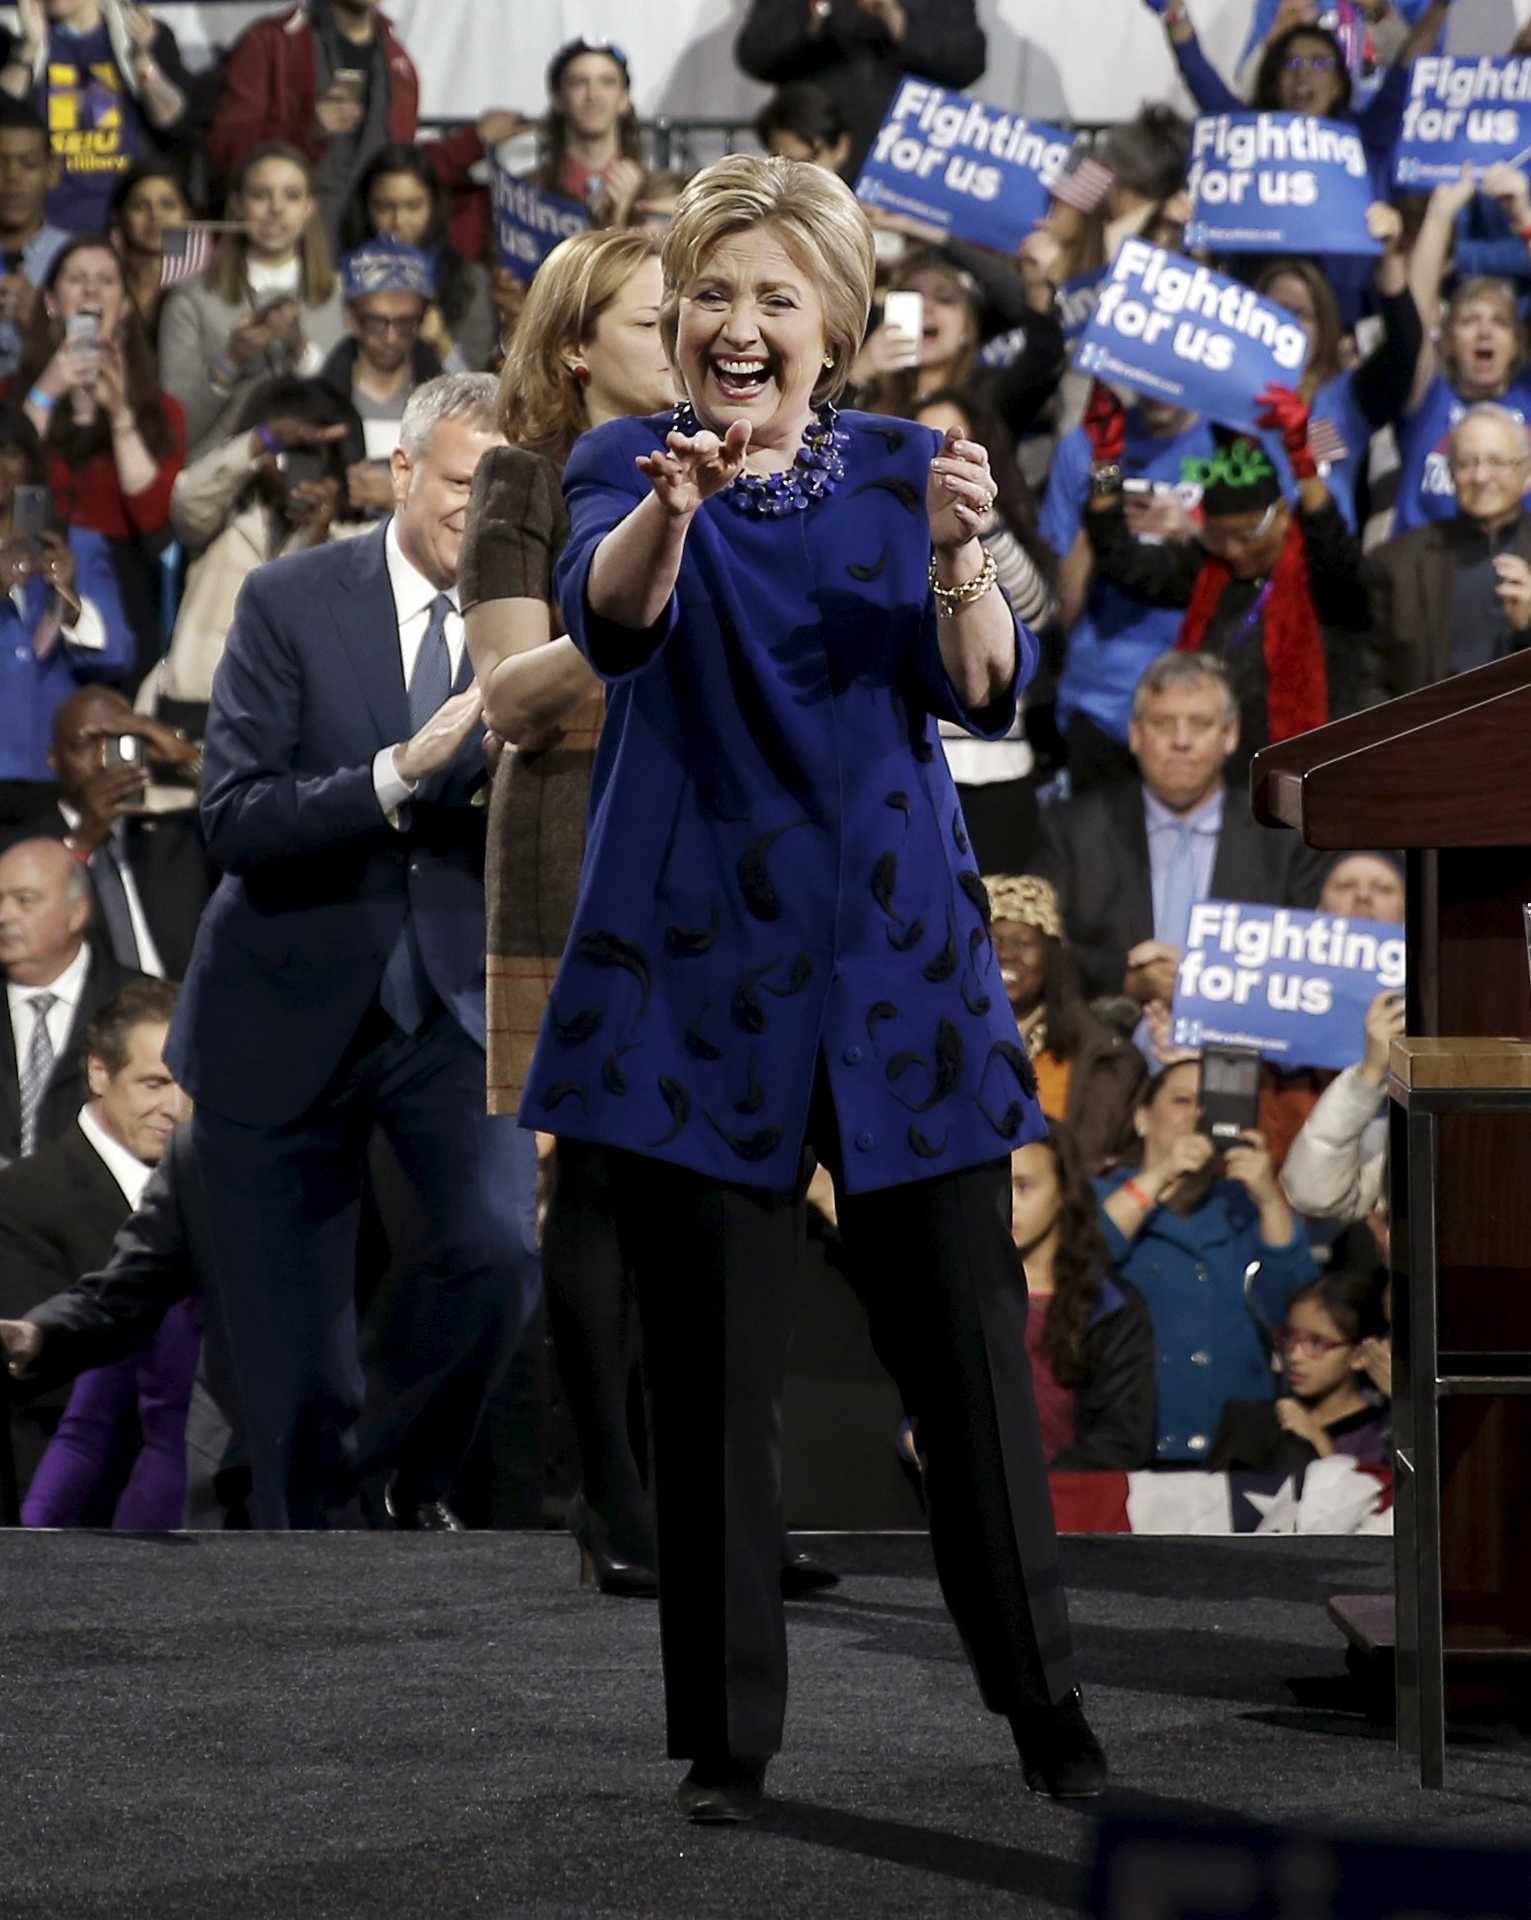 U.S. Democratic presidential candidate Hillary Clinton waves to supporters after speaking at a campaign event in the Manhattan borough of New York City